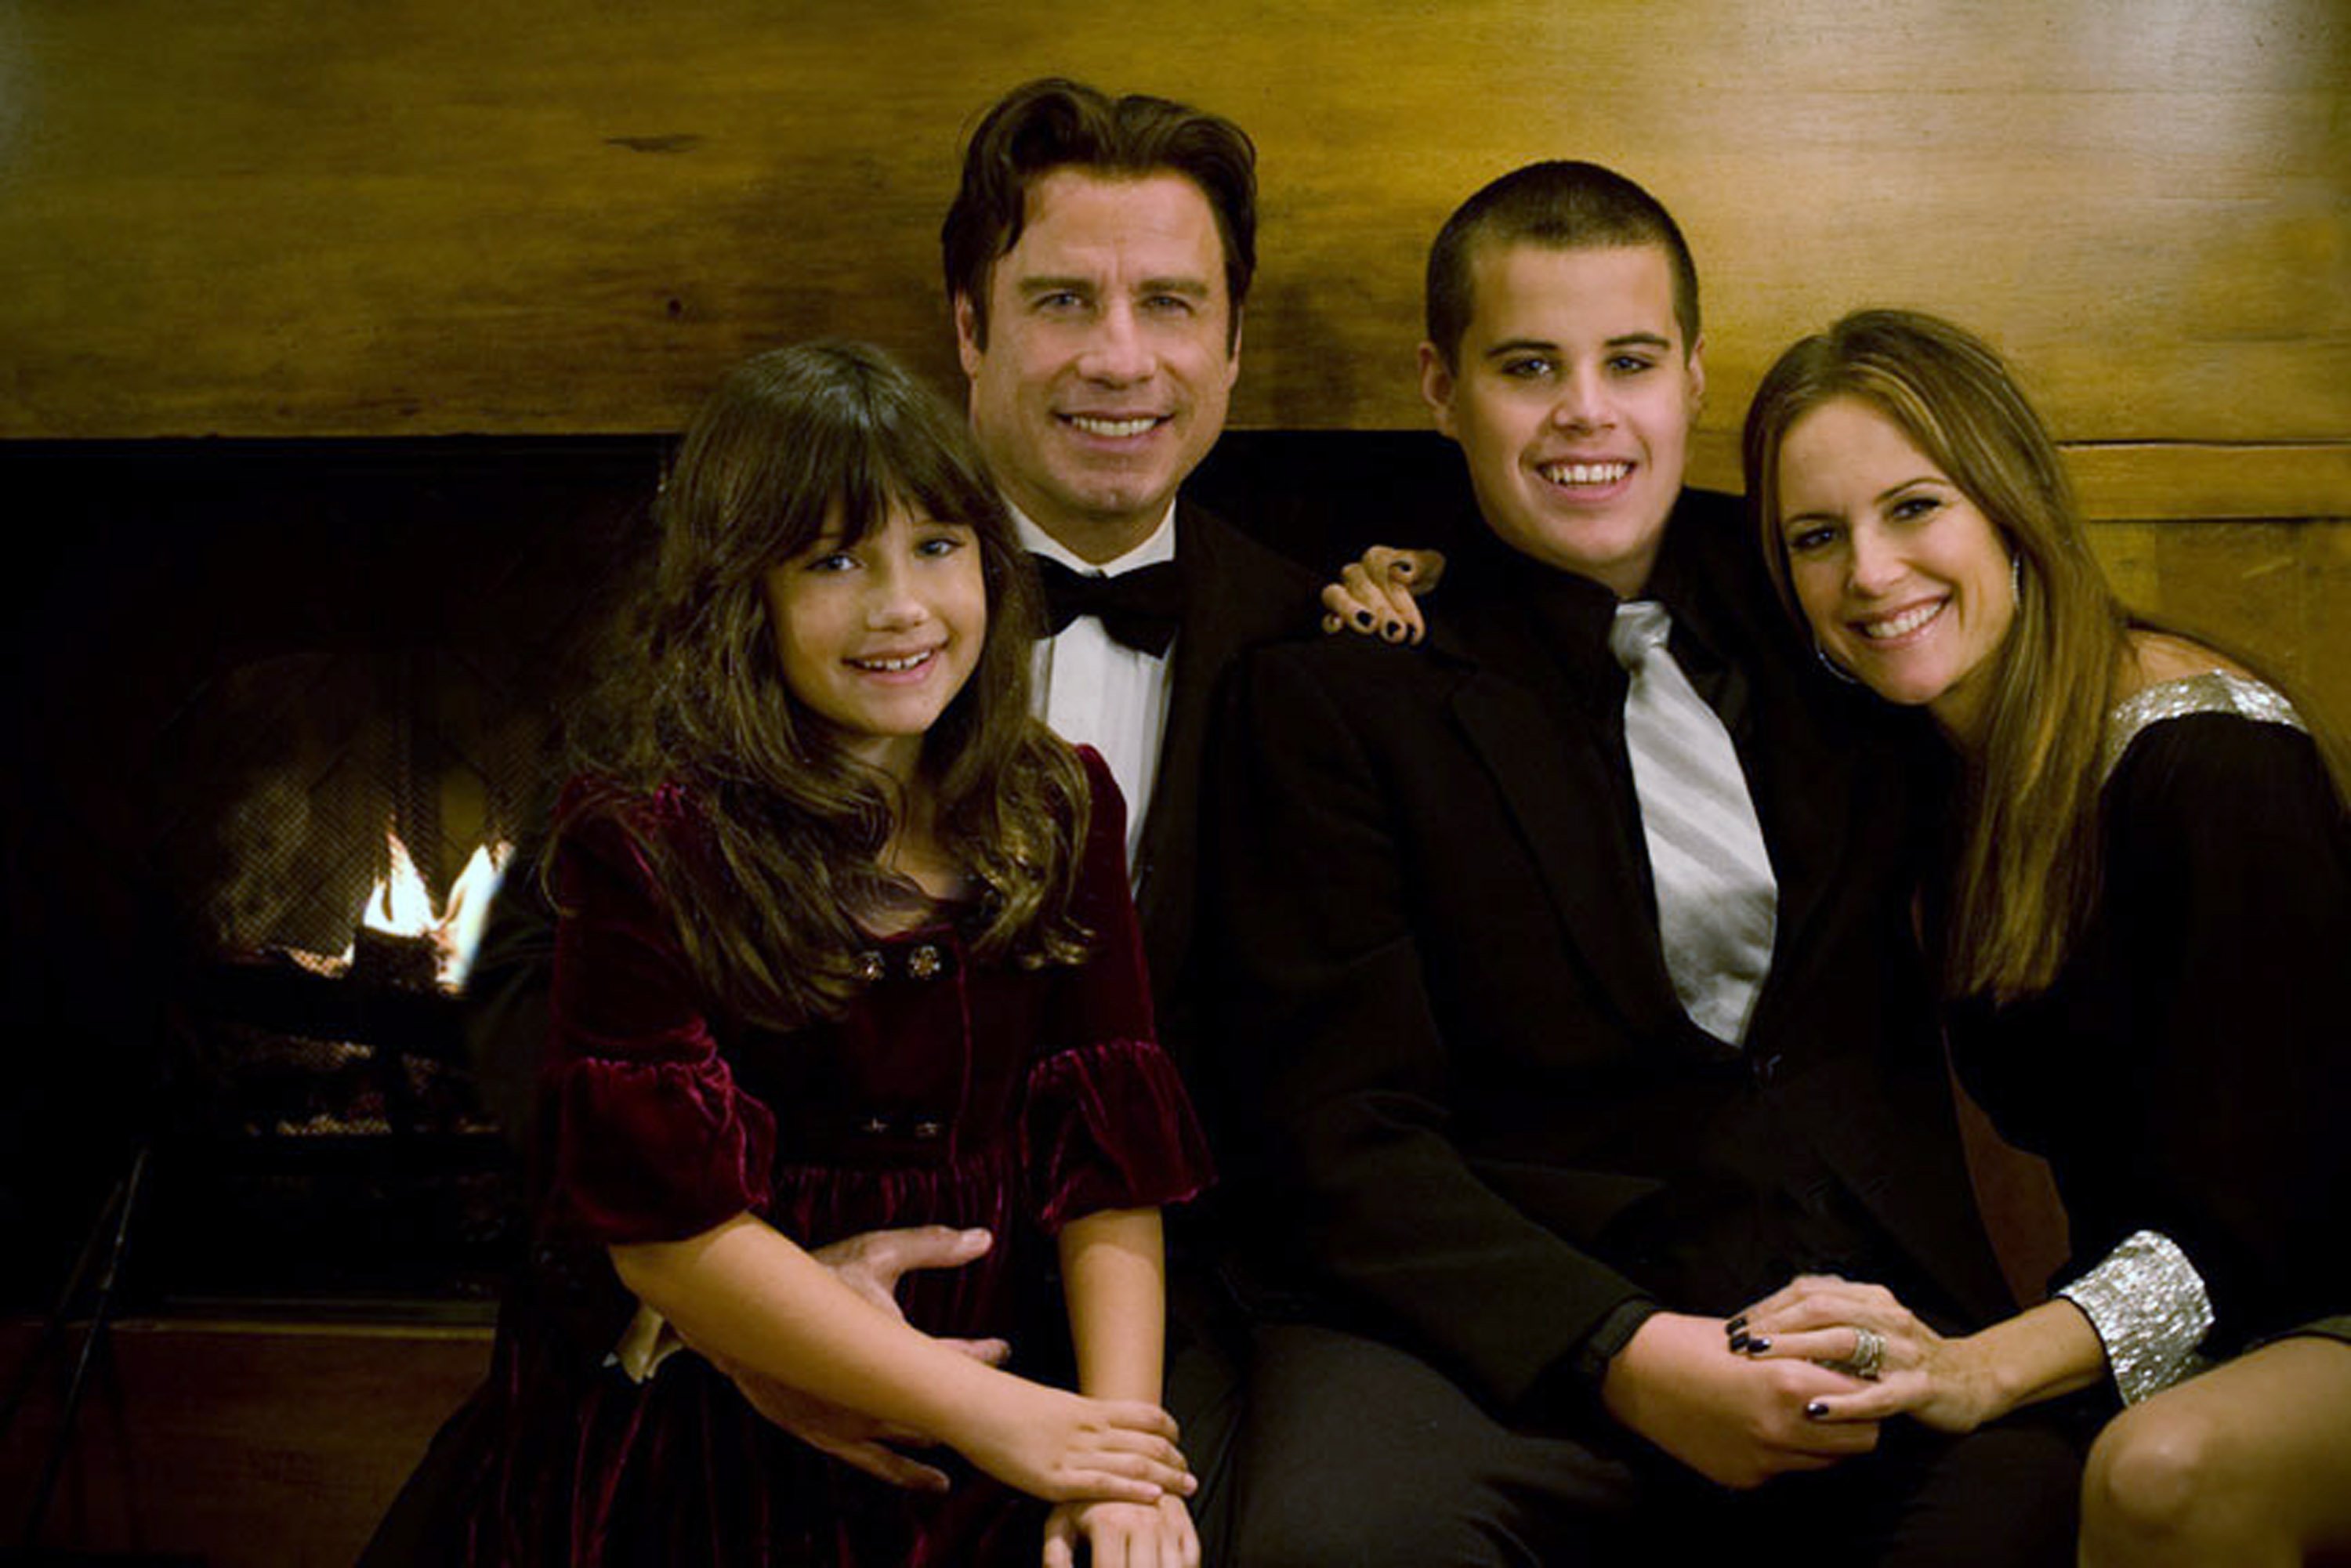 John Travolta with his wife Kelly Preston and their children Jett and Ella posing in an undated photo. | Source: Getty Images